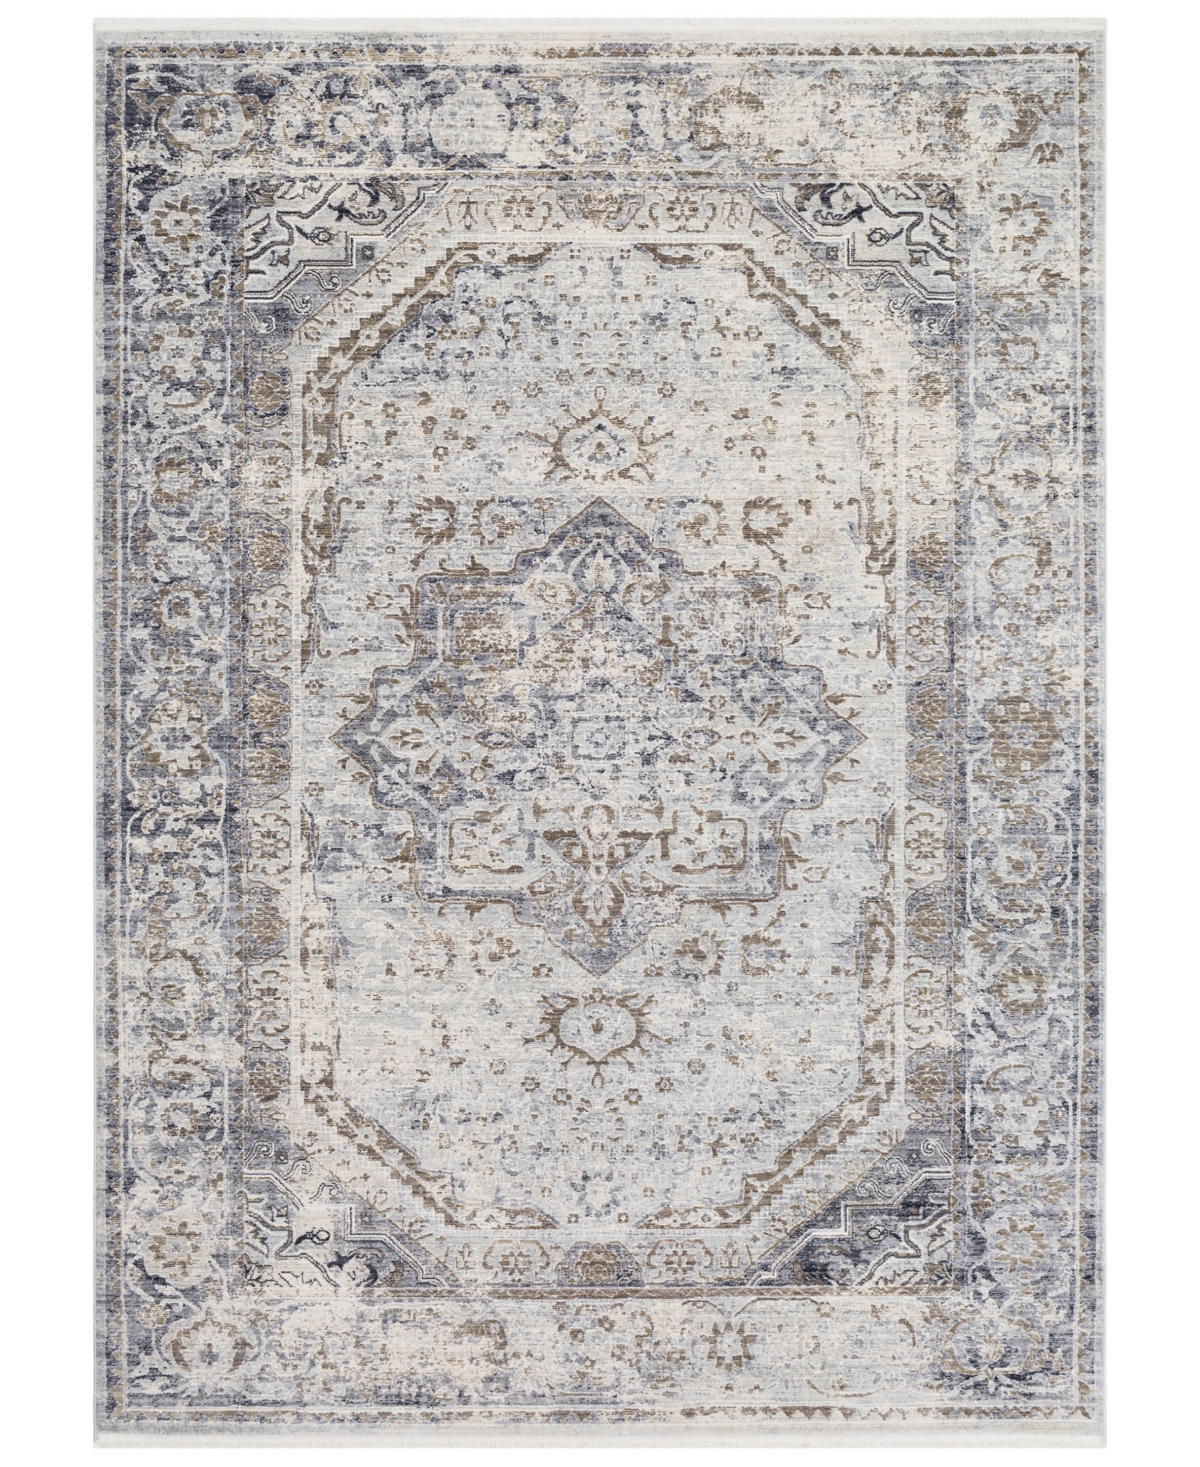 Surya Liverpool Lvp-2302 Charcoal 7'10in x 10'3in Area Rug - Charcoal